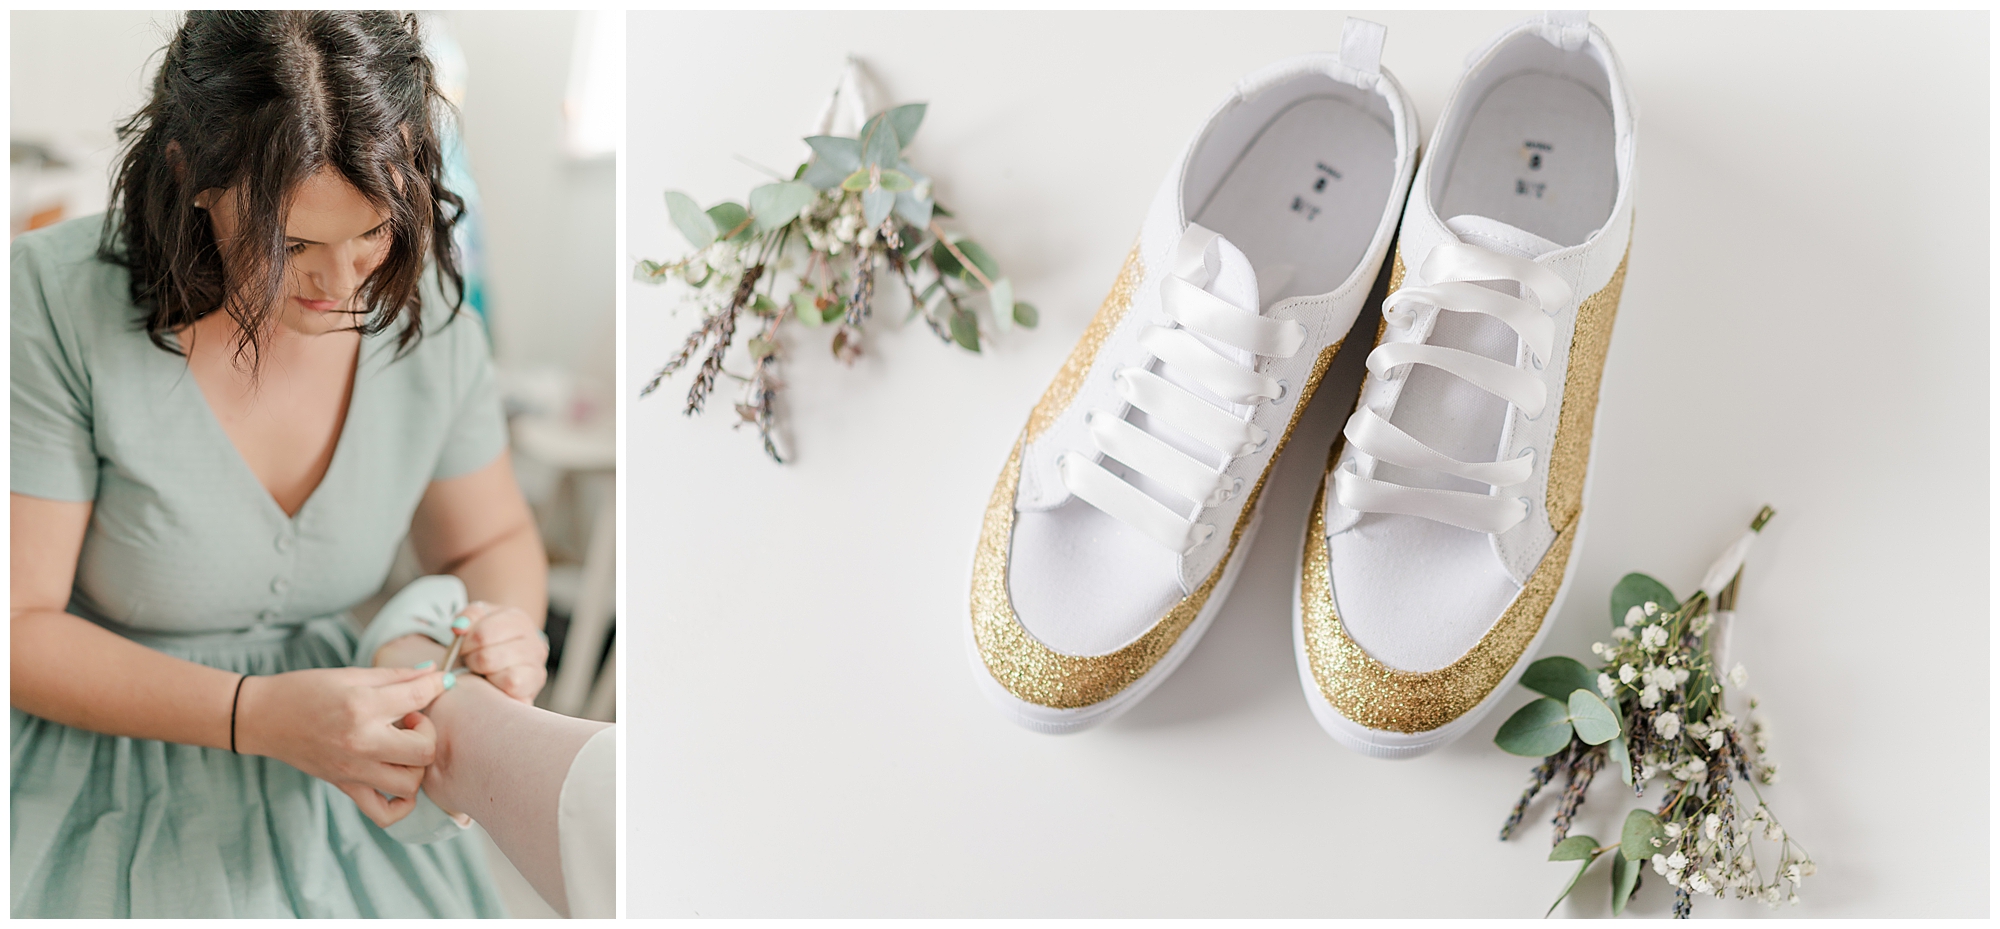 DIY glitter shoes of the bridesmaids